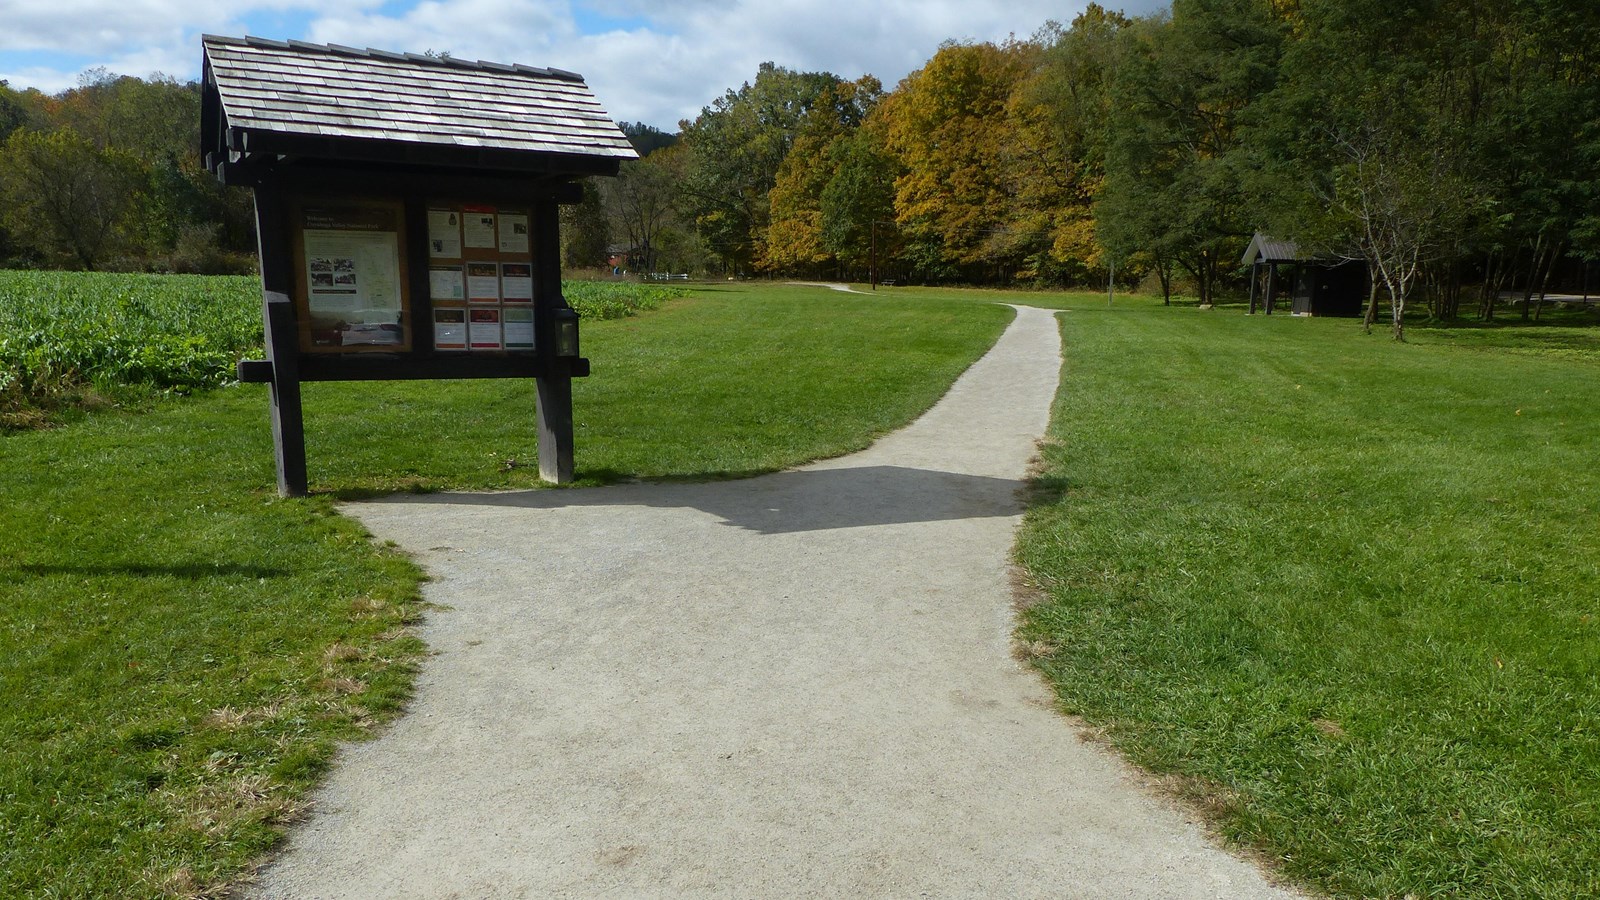 Firm, flat, unpaved trail curves from kiosk, past restrooms, to the distant red bridge in the trees.